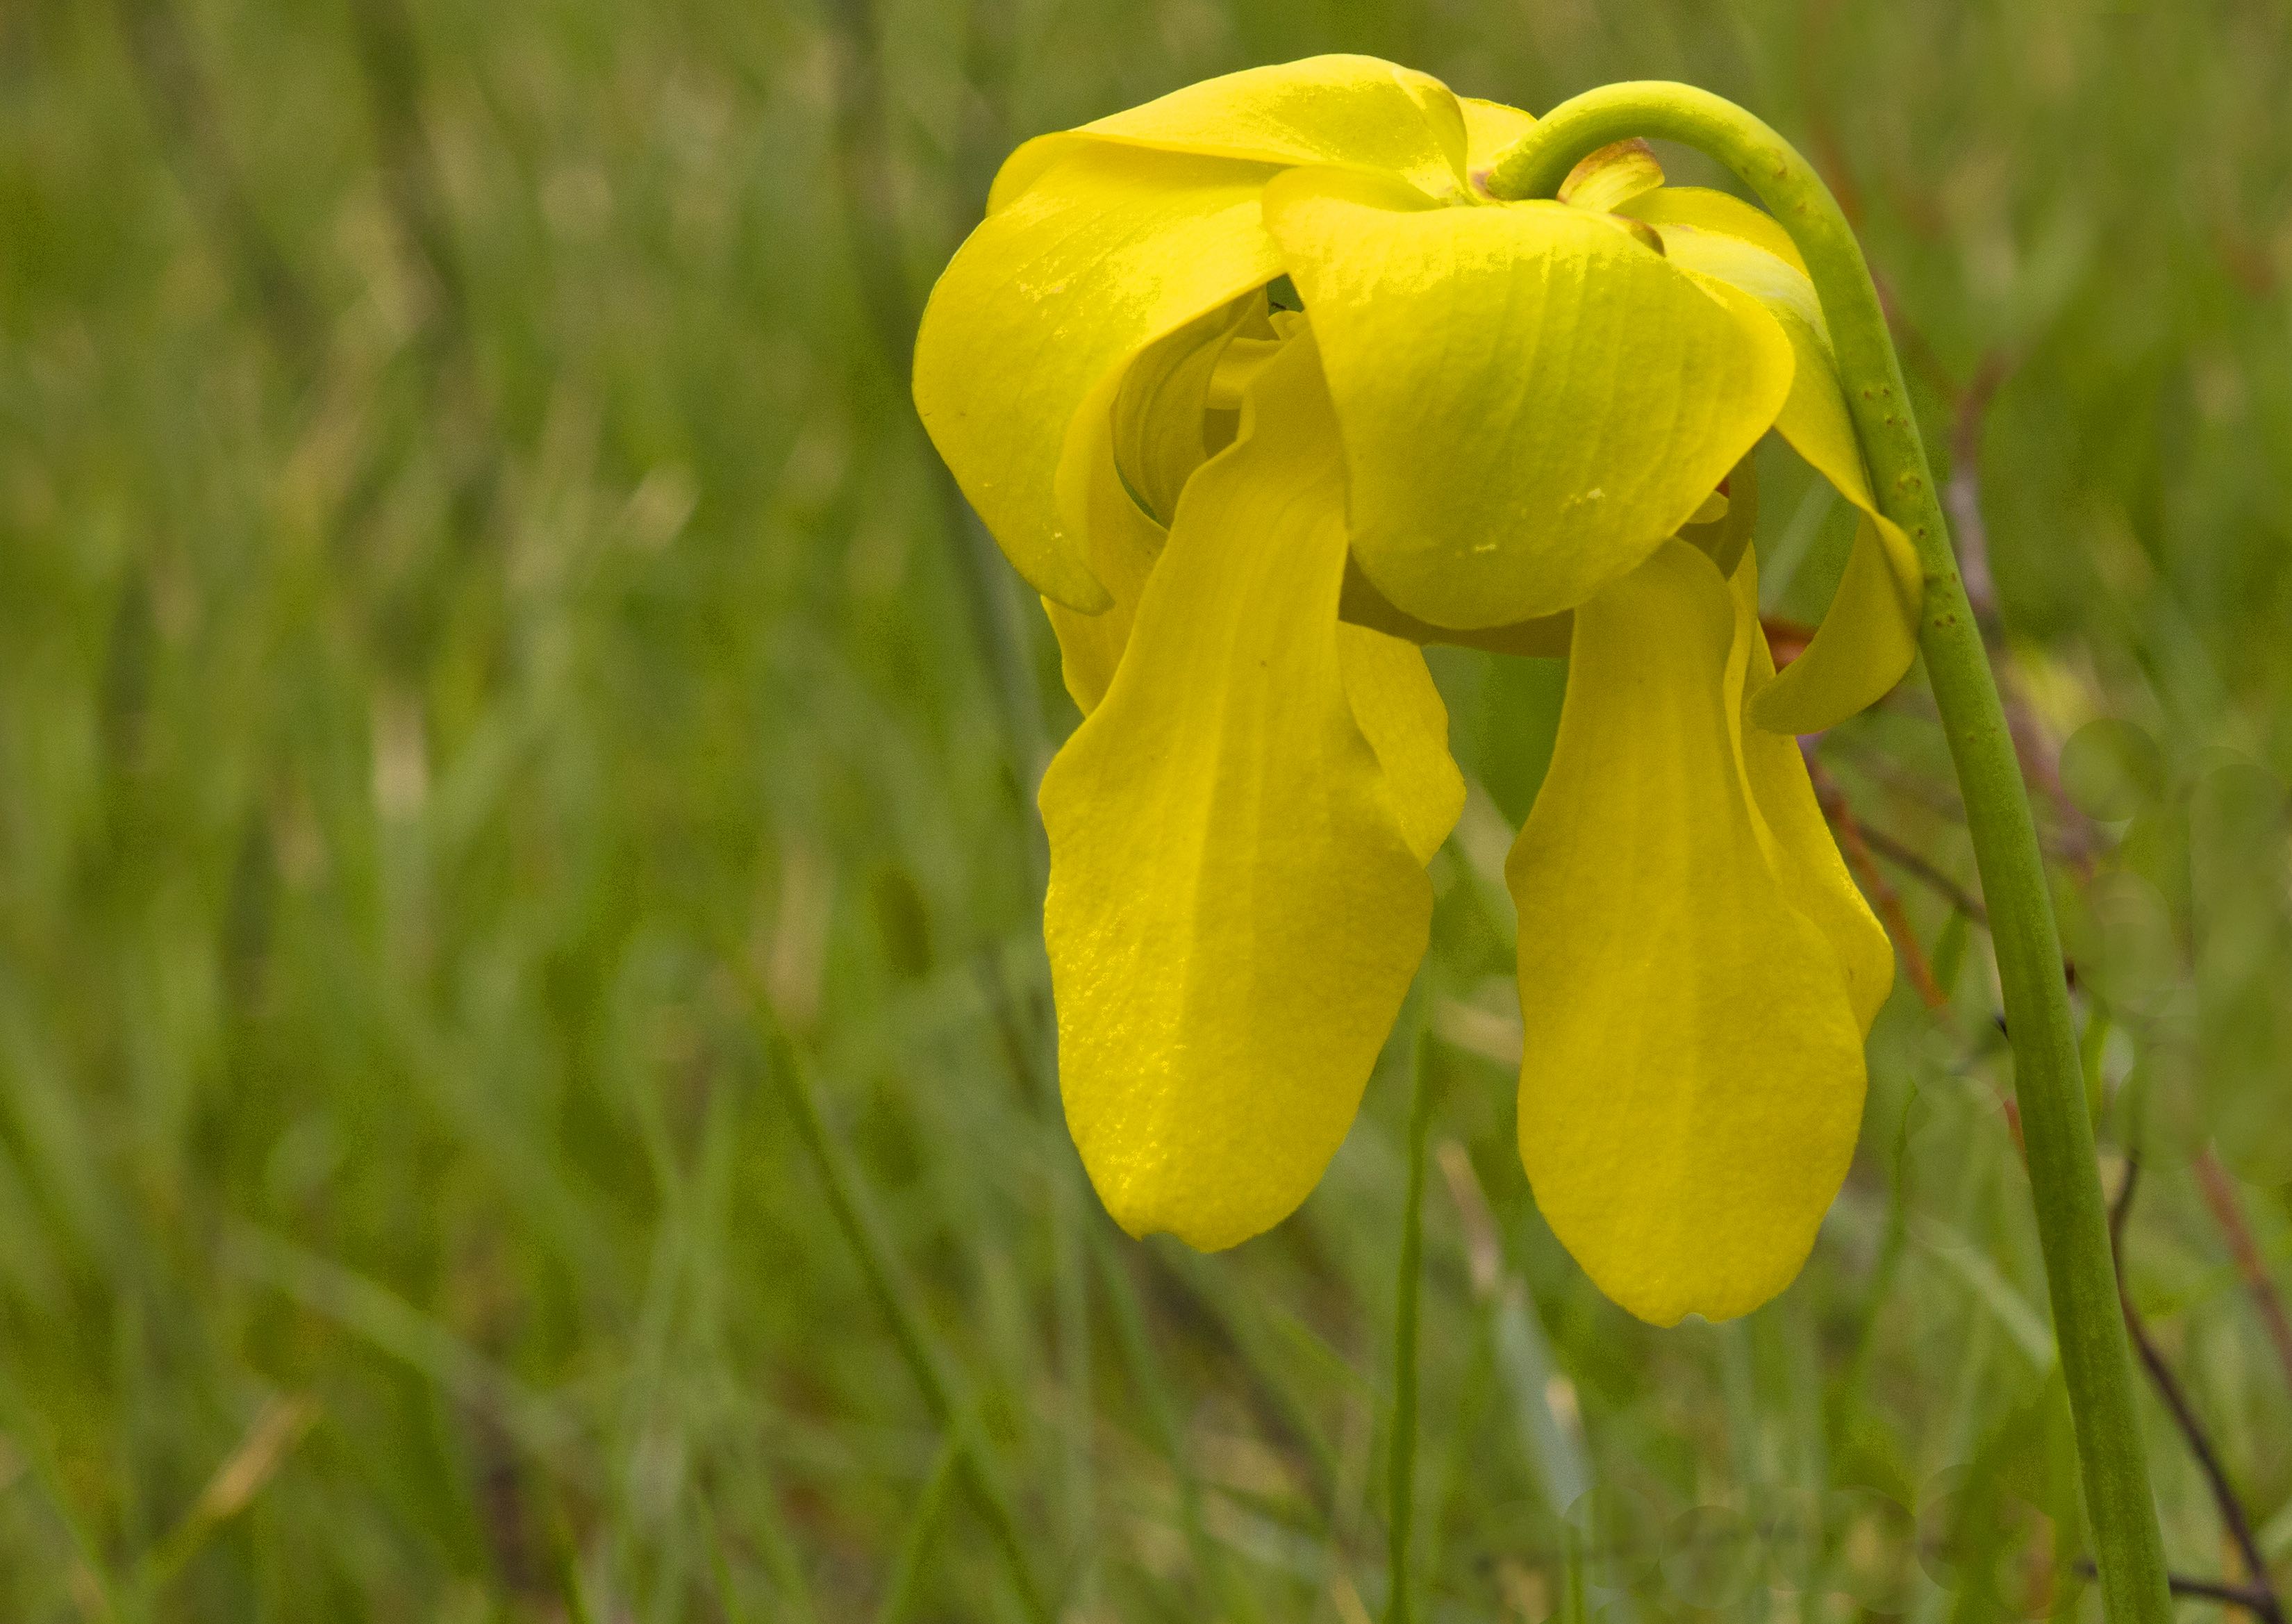 The Scientific Name is Sarracenia flava. You will likely hear them called Yellow Pitcherplant. This picture shows the Large yellow flowers. of Sarracenia flava